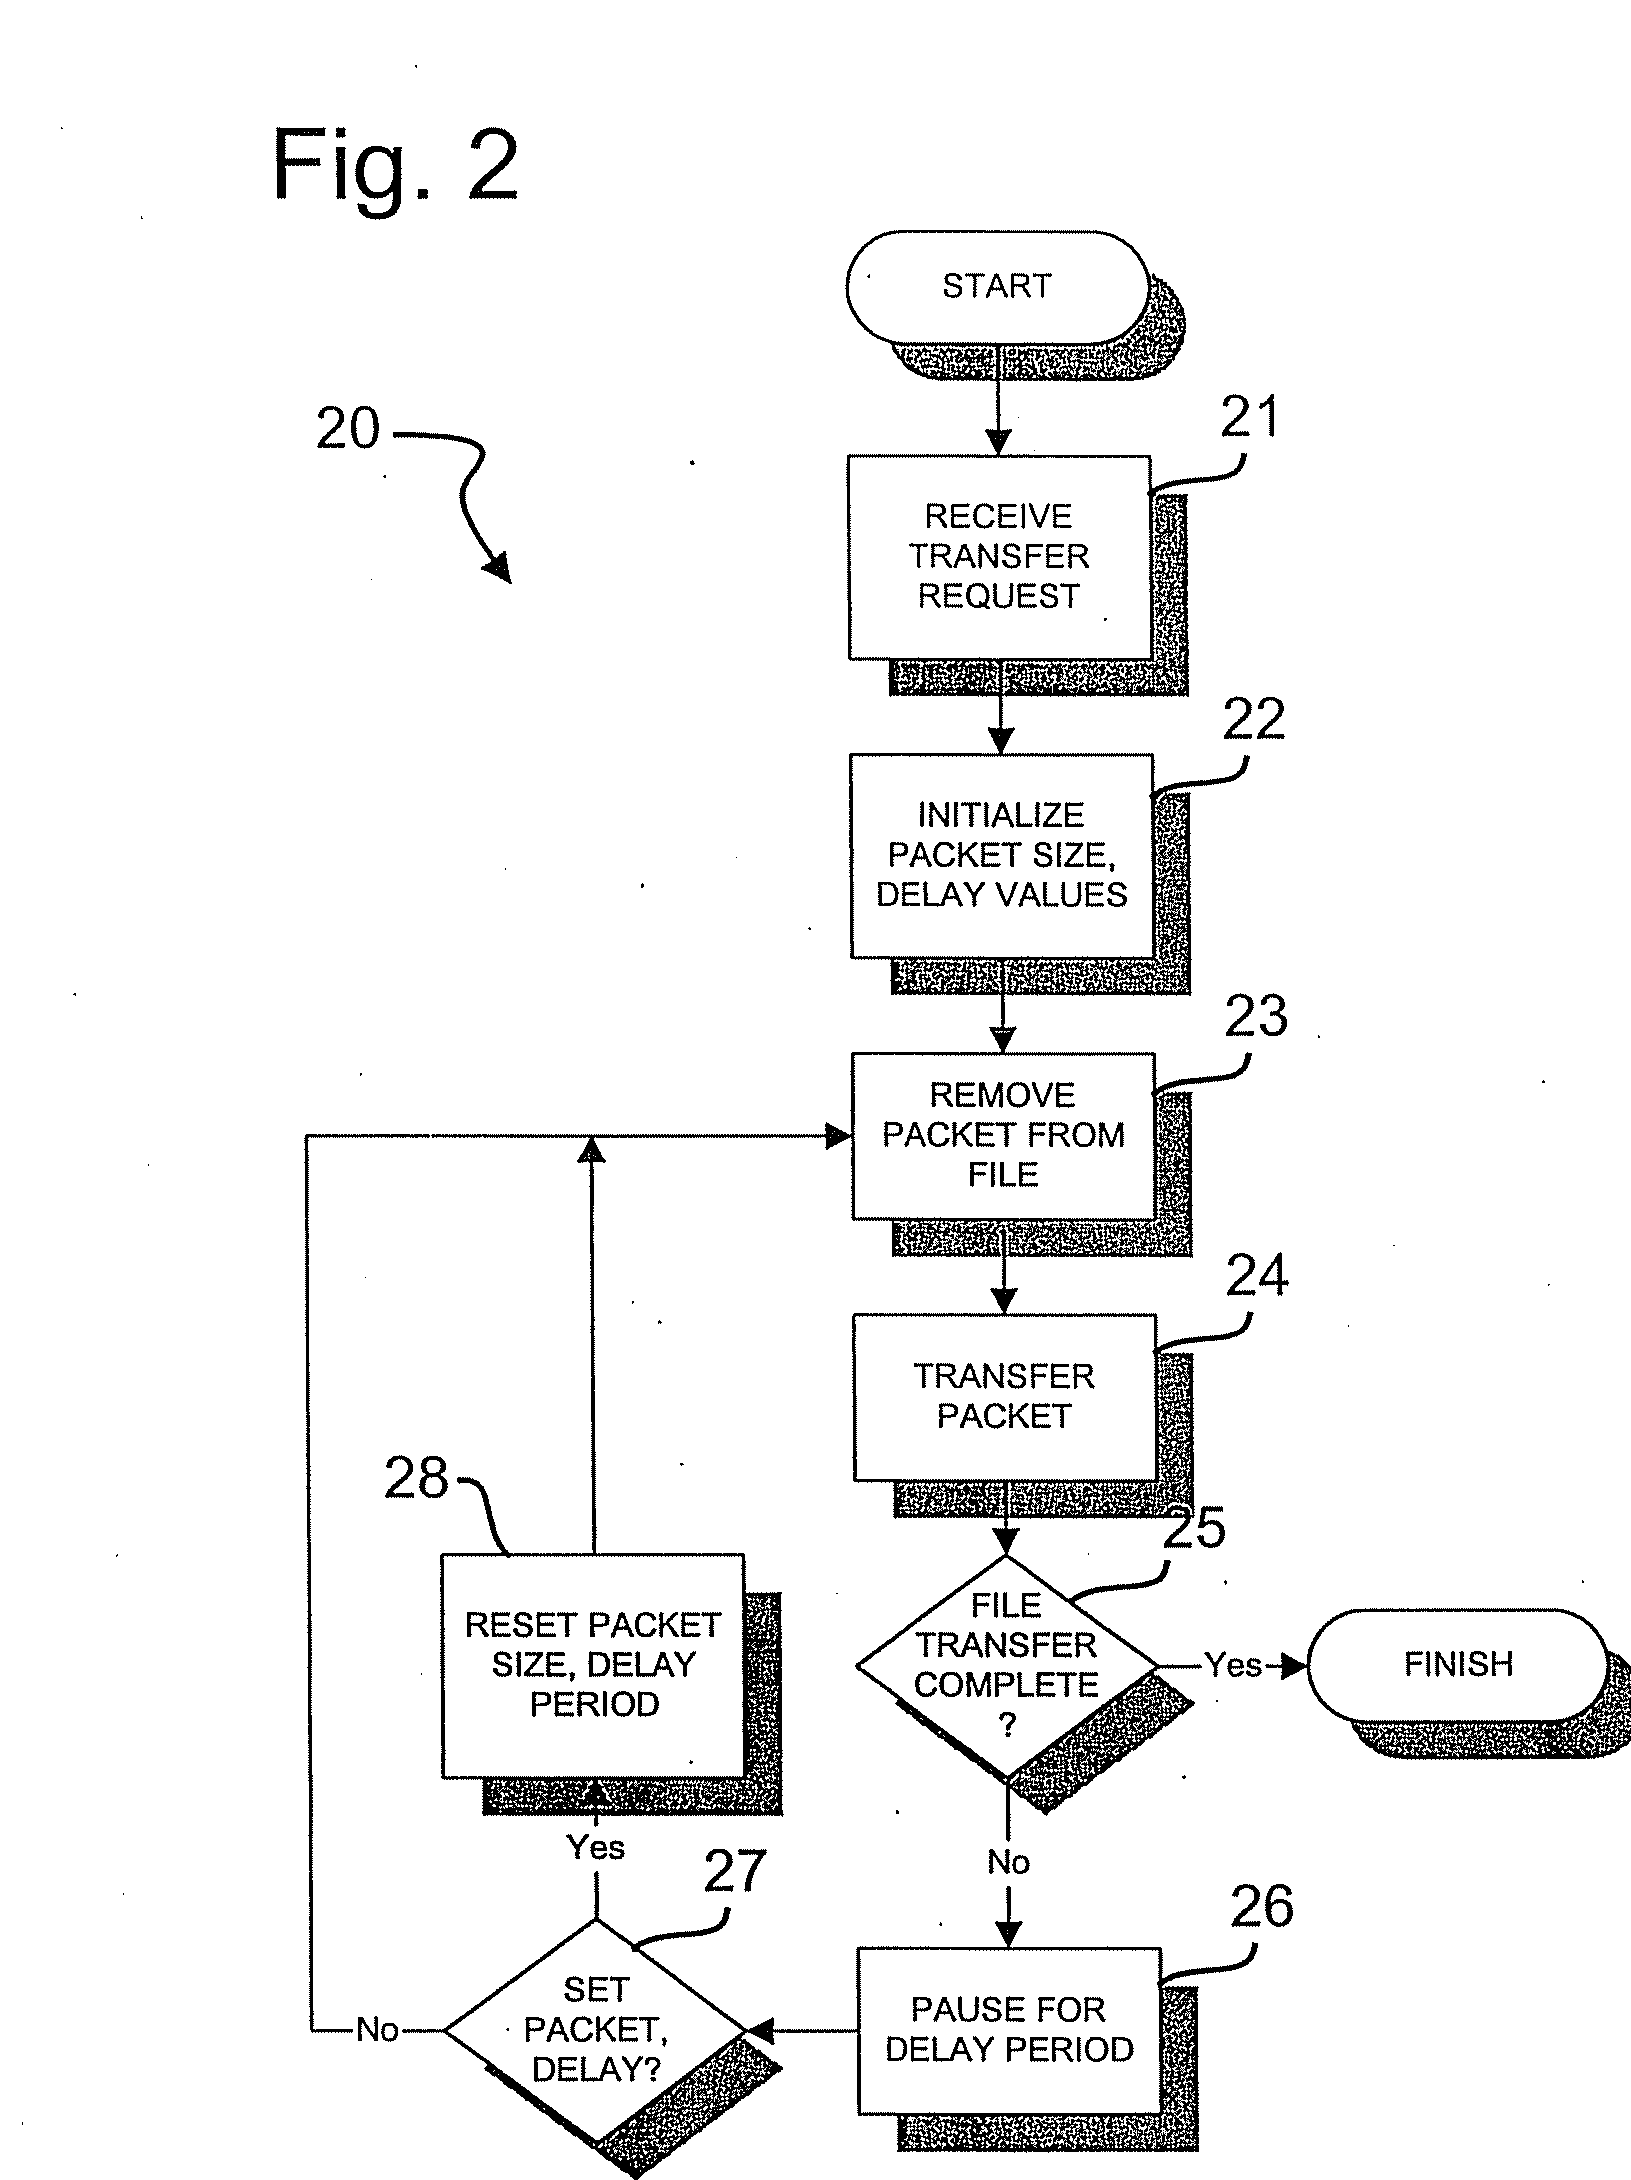 Management of bandwidth allocation in a network server